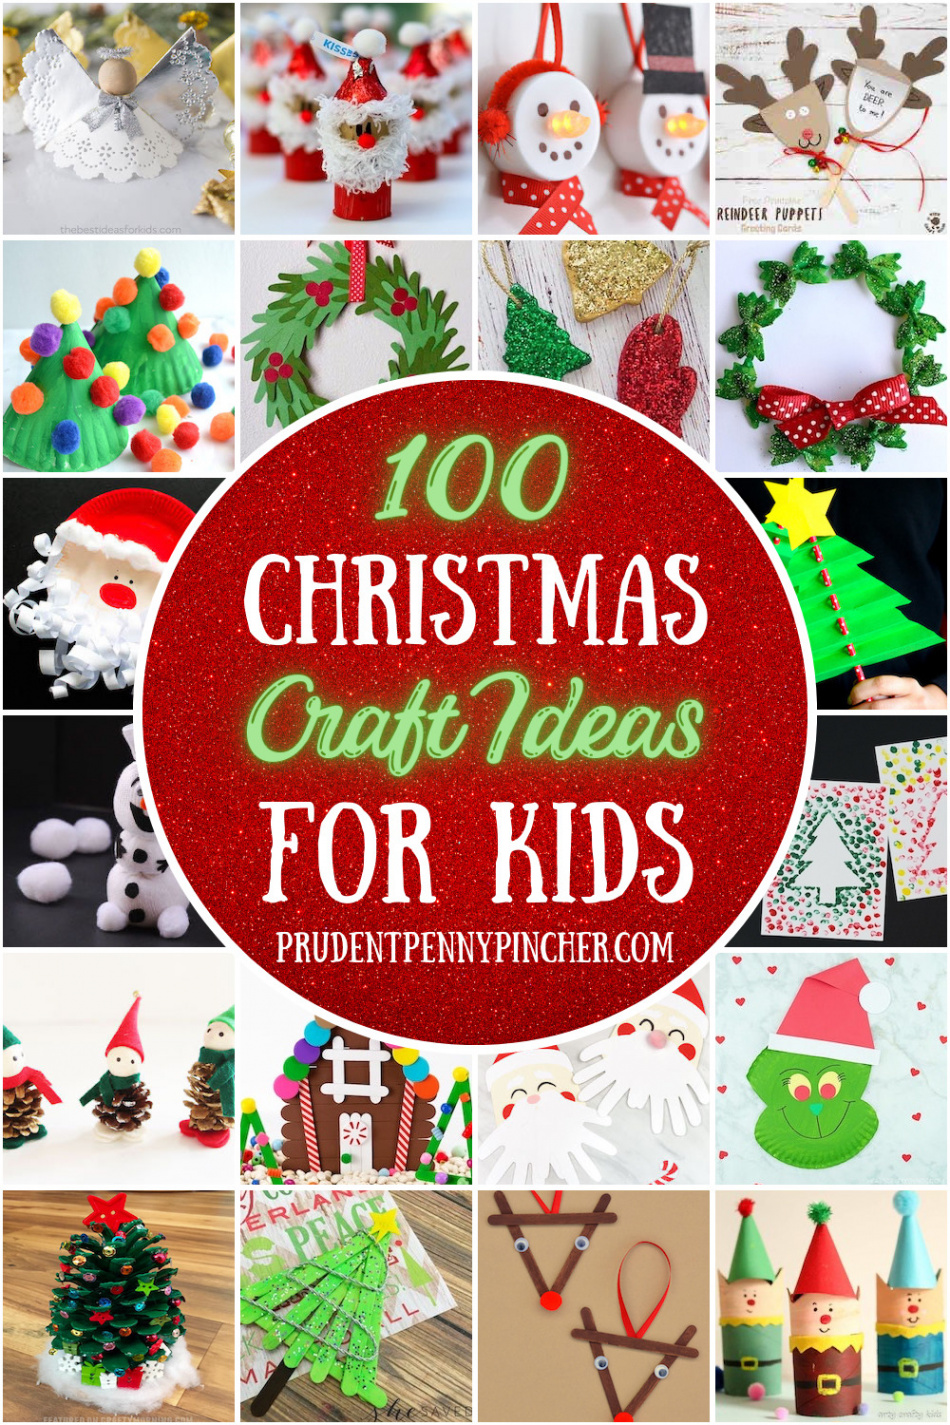 Easy Christmas Crafts for Kids - Prudent Penny Pincher